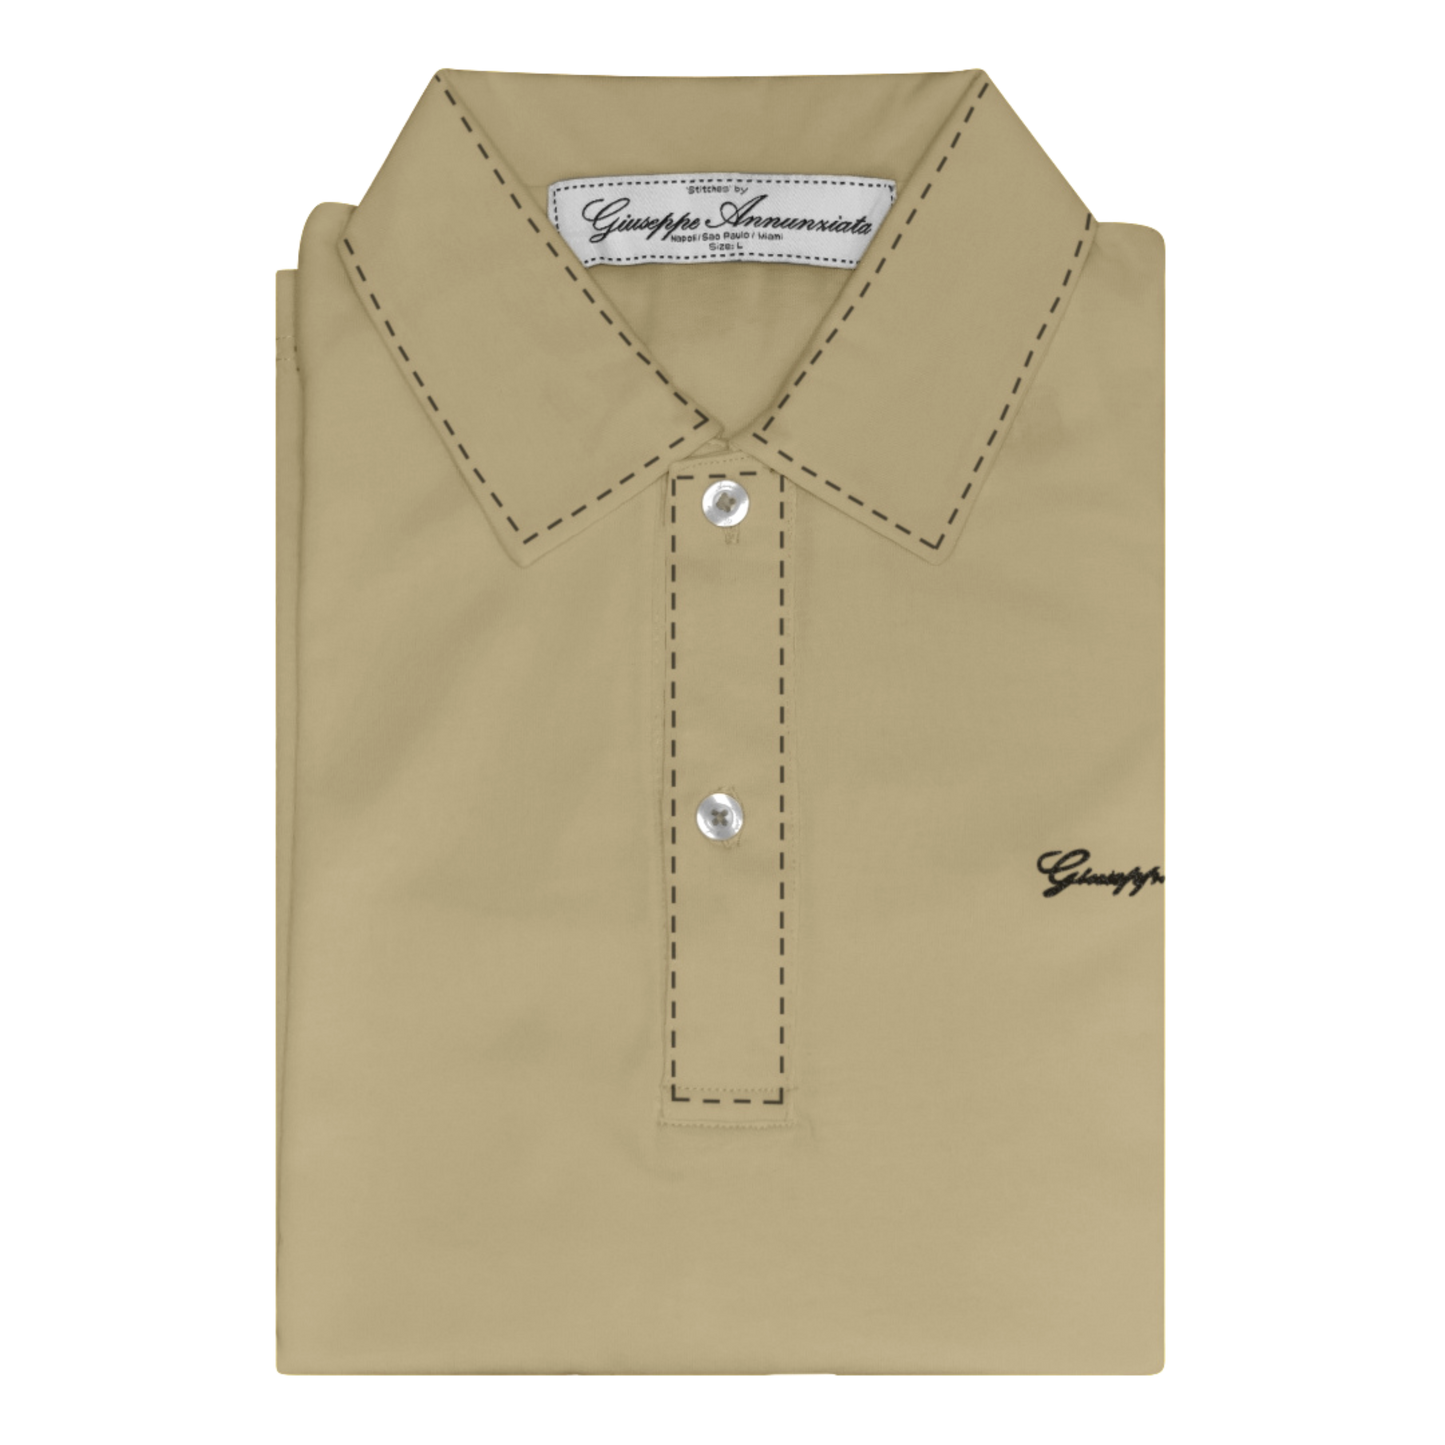 Stitches Polo Beige and Brown